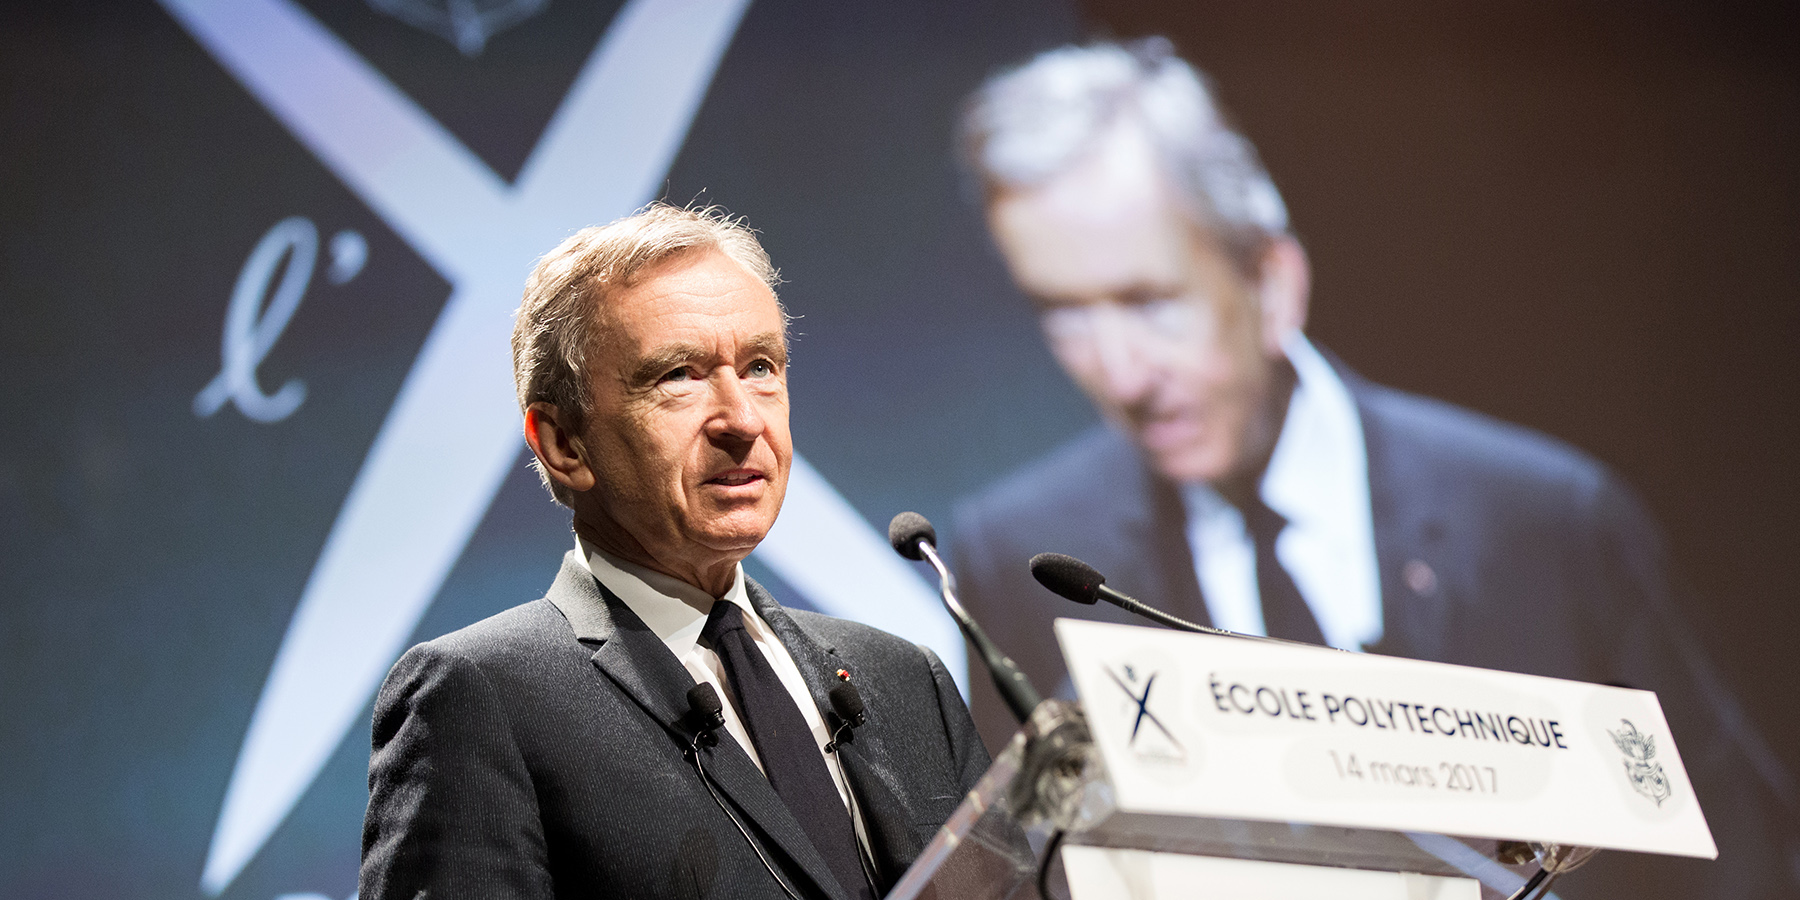 Marketing Mind - Bernard Arnault and family, the owners of